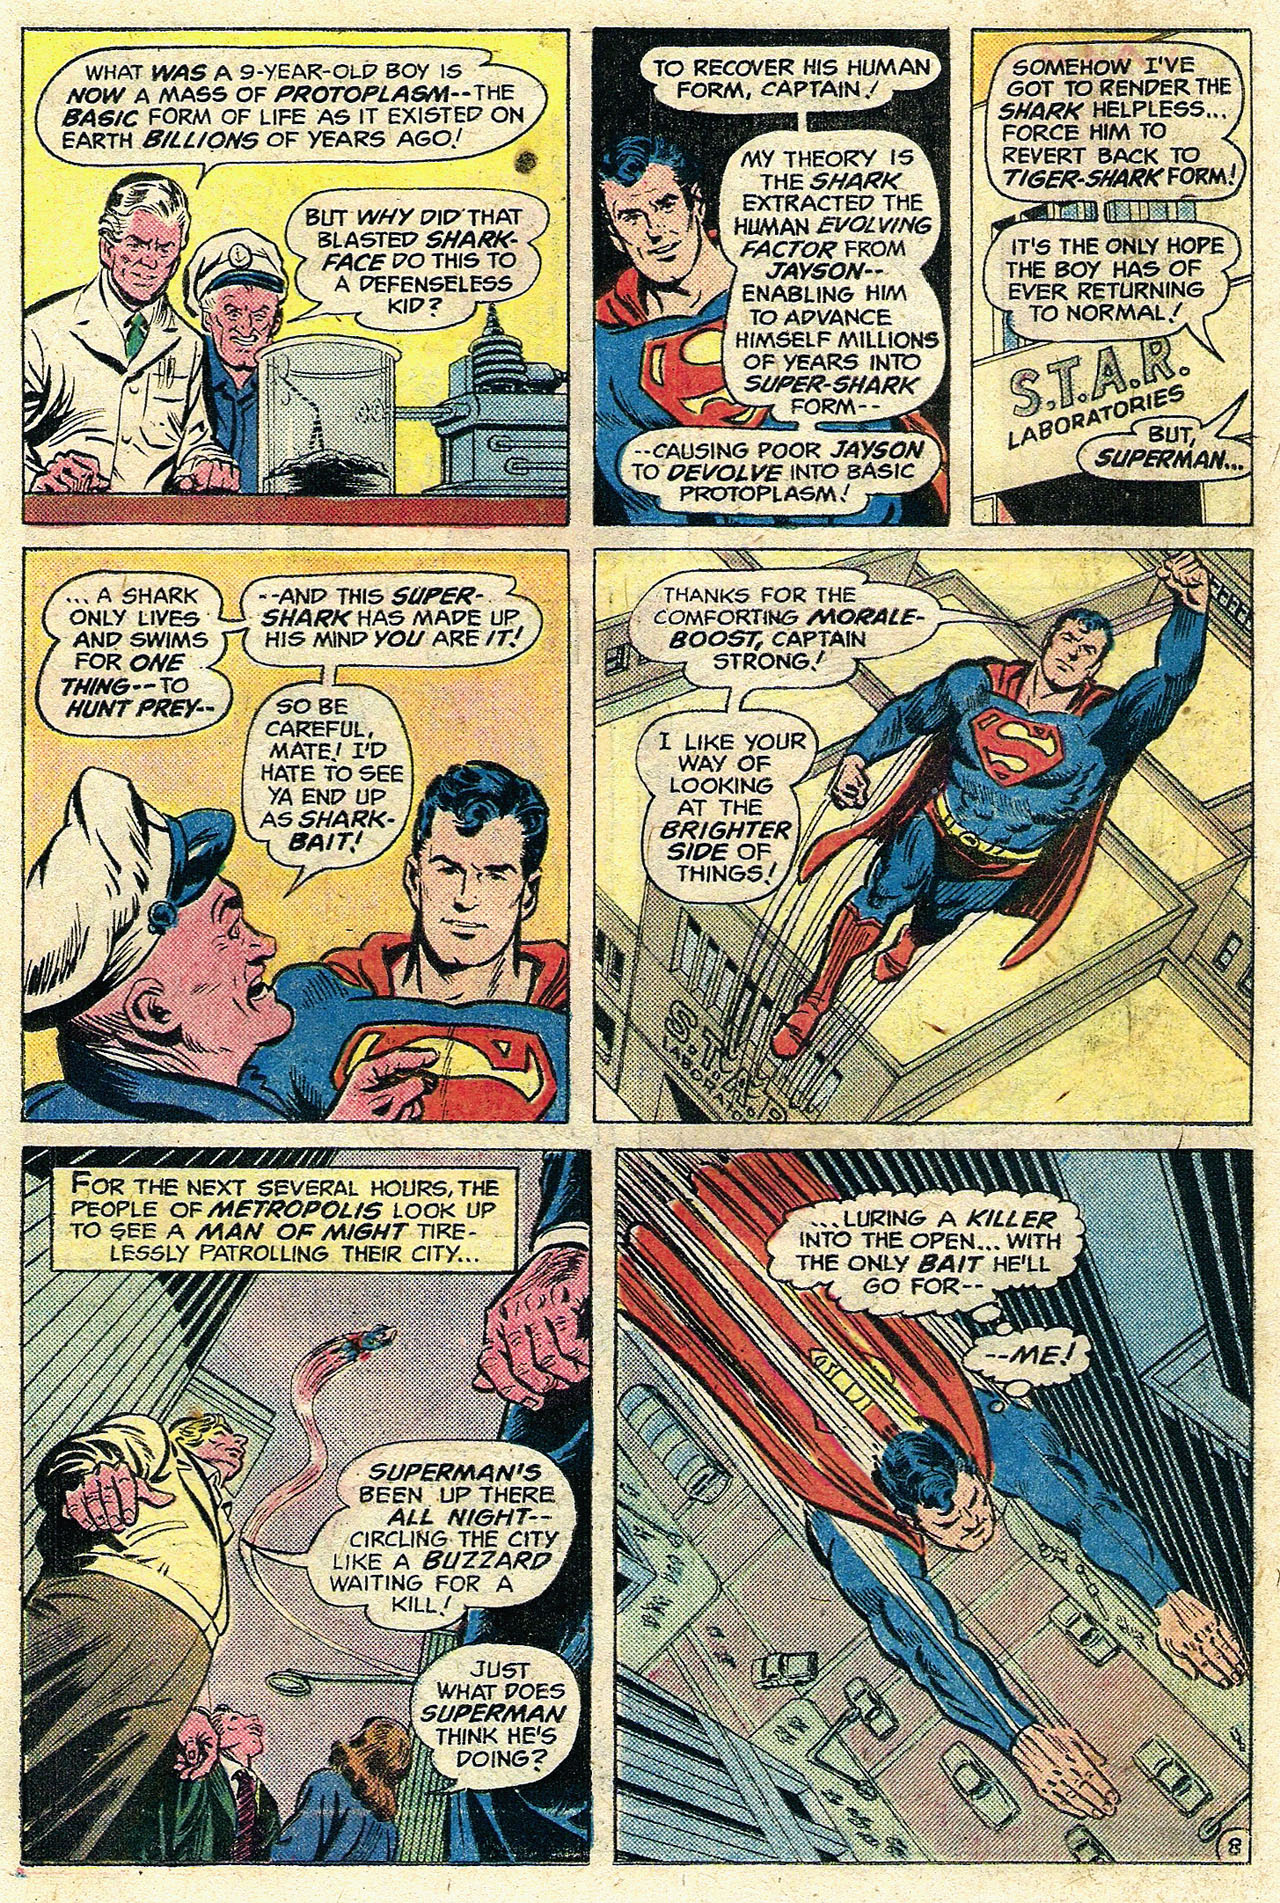 Read online Action Comics (1938) comic -  Issue #456 - 15